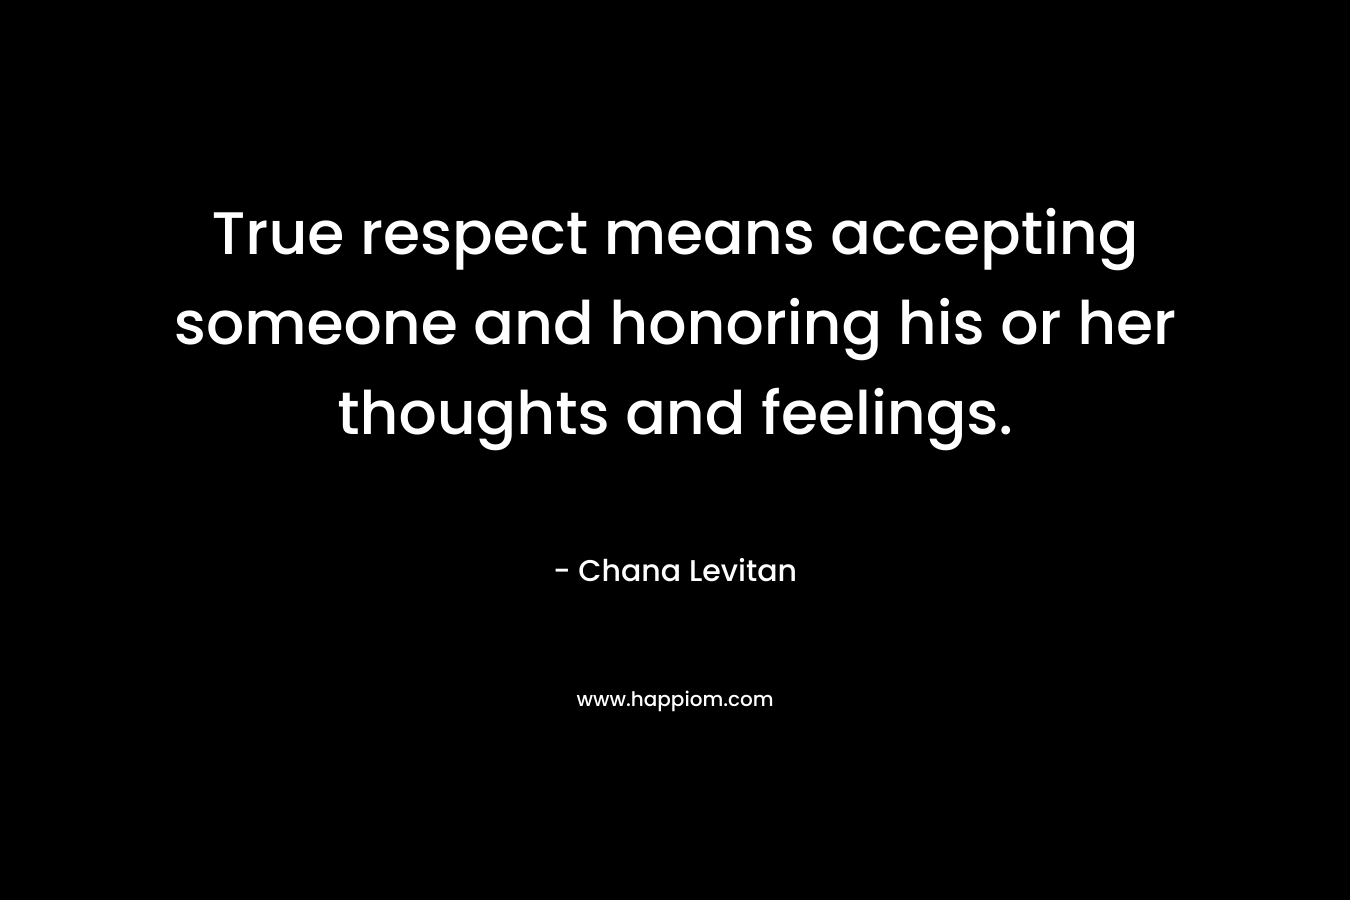 True respect means accepting someone and honoring his or her thoughts and feelings.